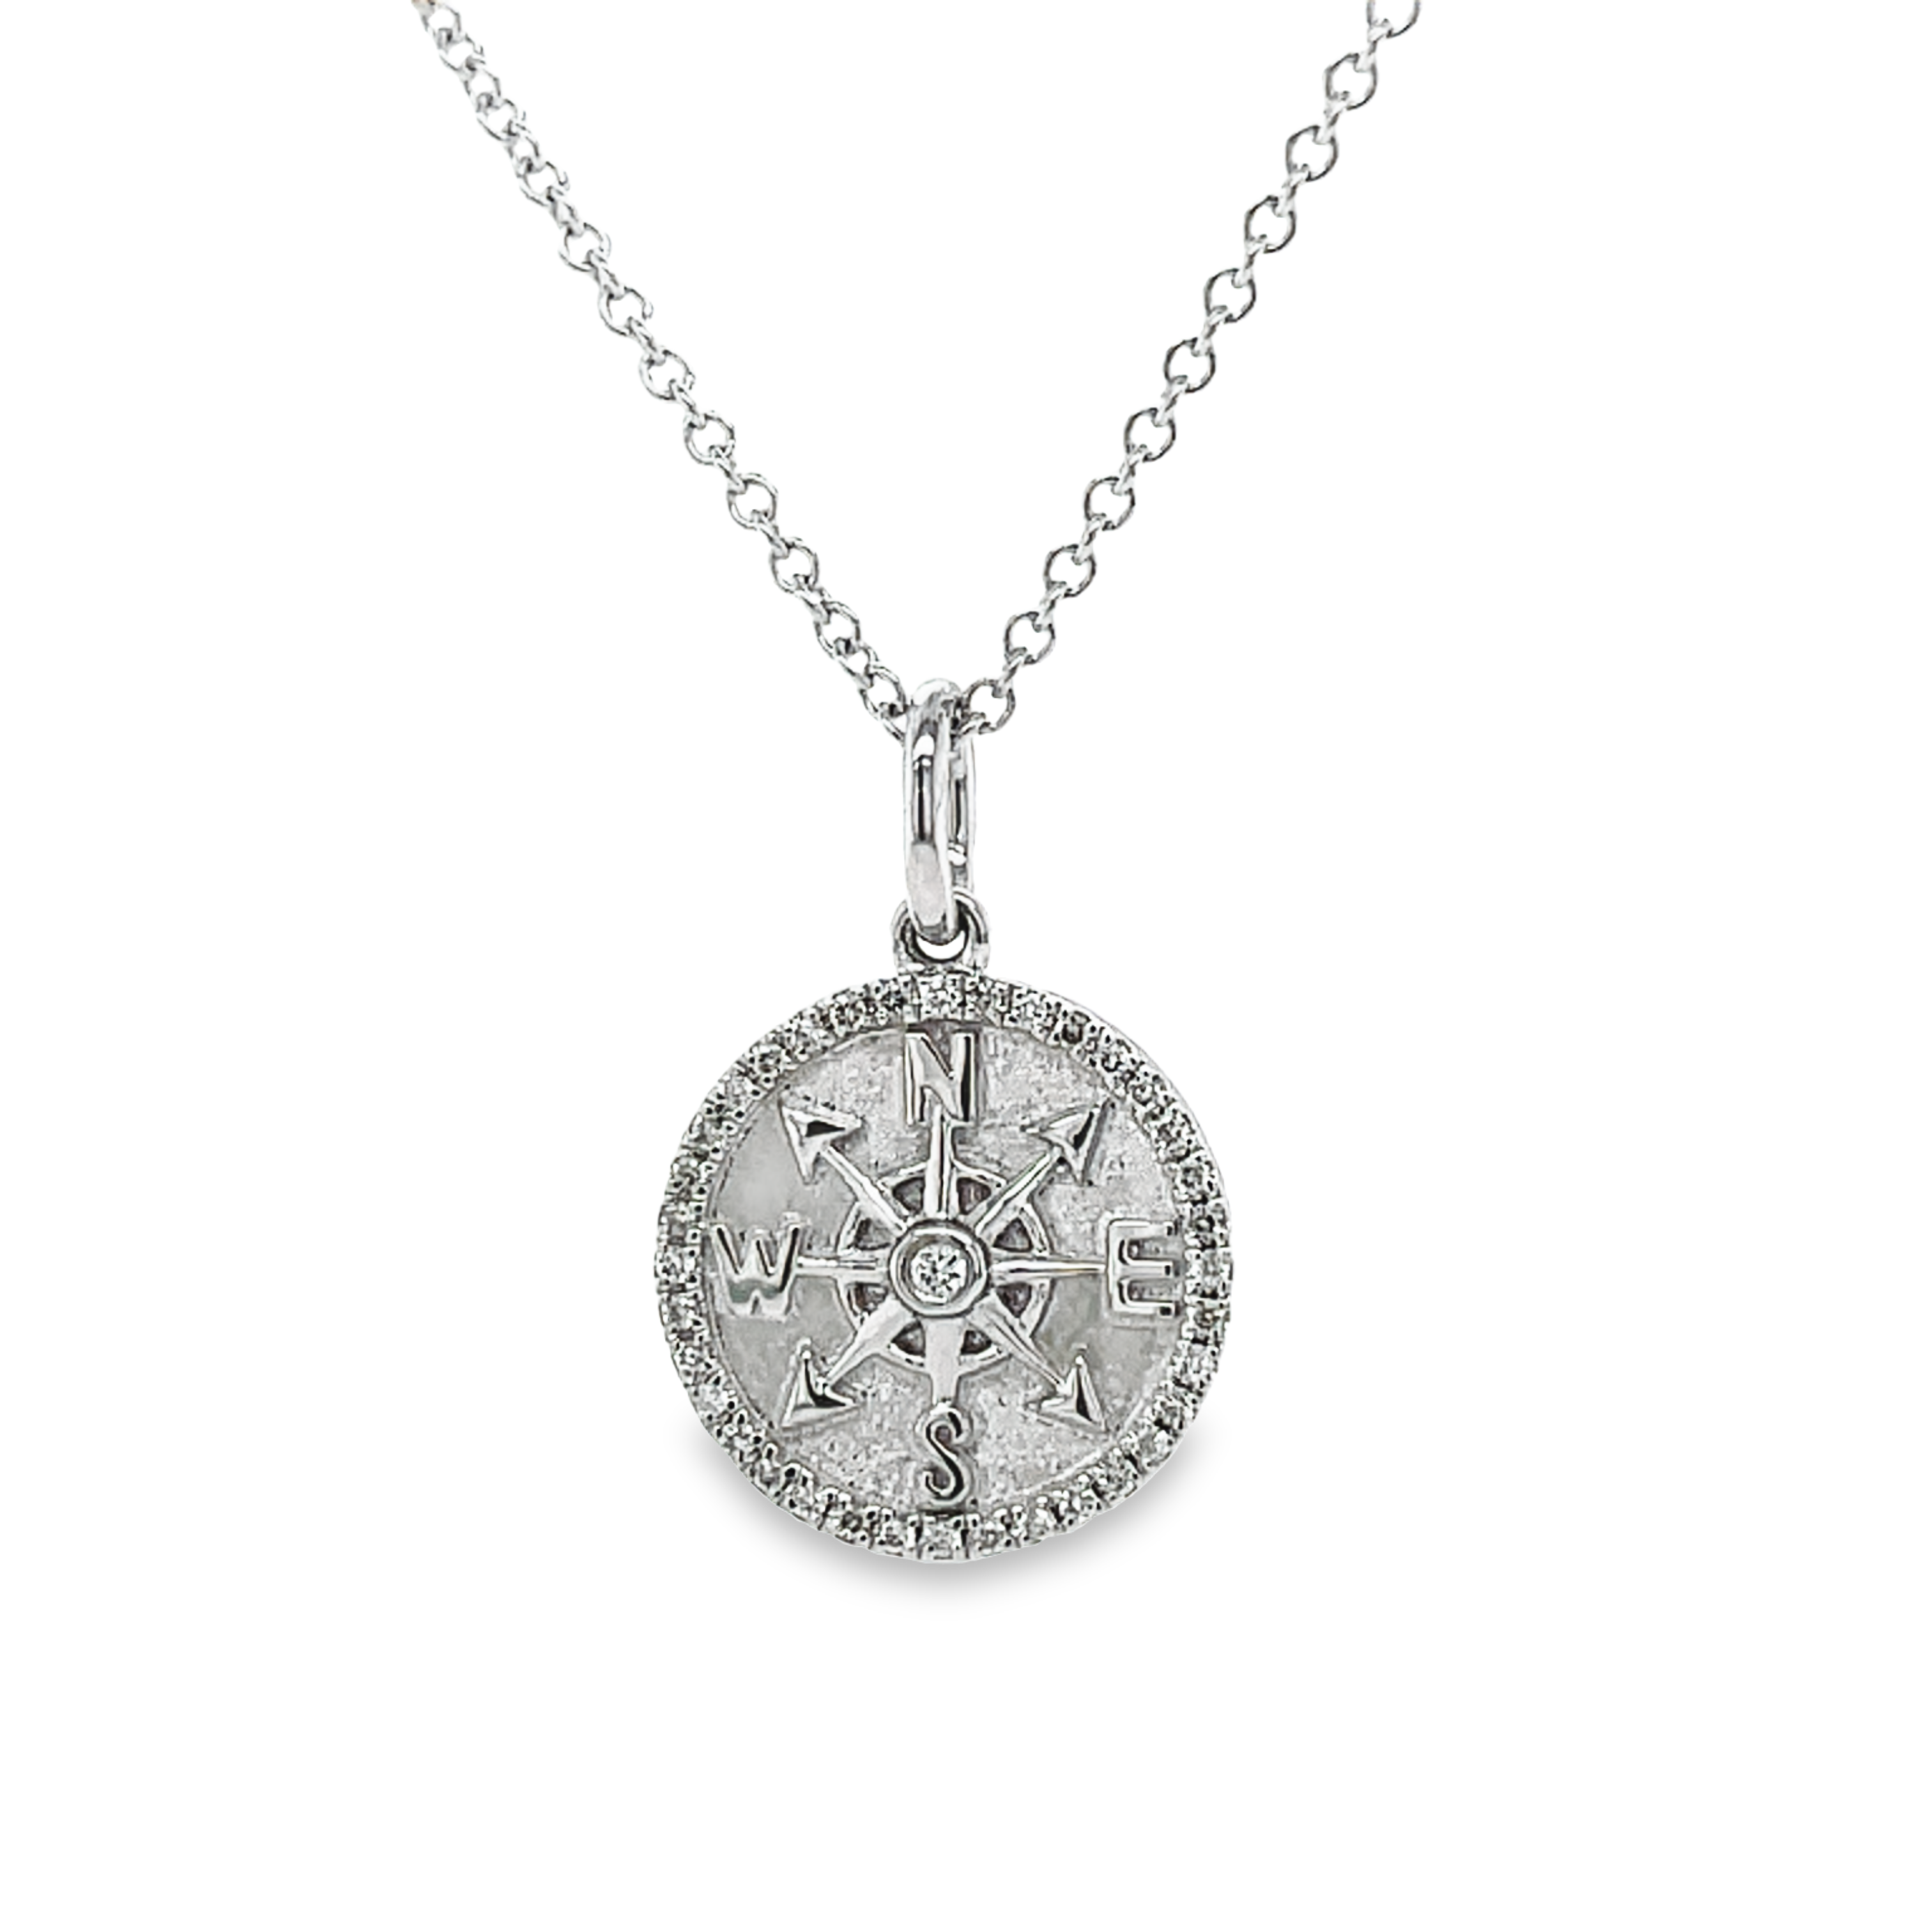 Beautiful compass pendant.  14k white gold.  Secure bail  Round diamonds 0.12 cts   18.00 mm length (including bail)  18" 1.3 mm gold chain available (optional, not included in price) $299.00